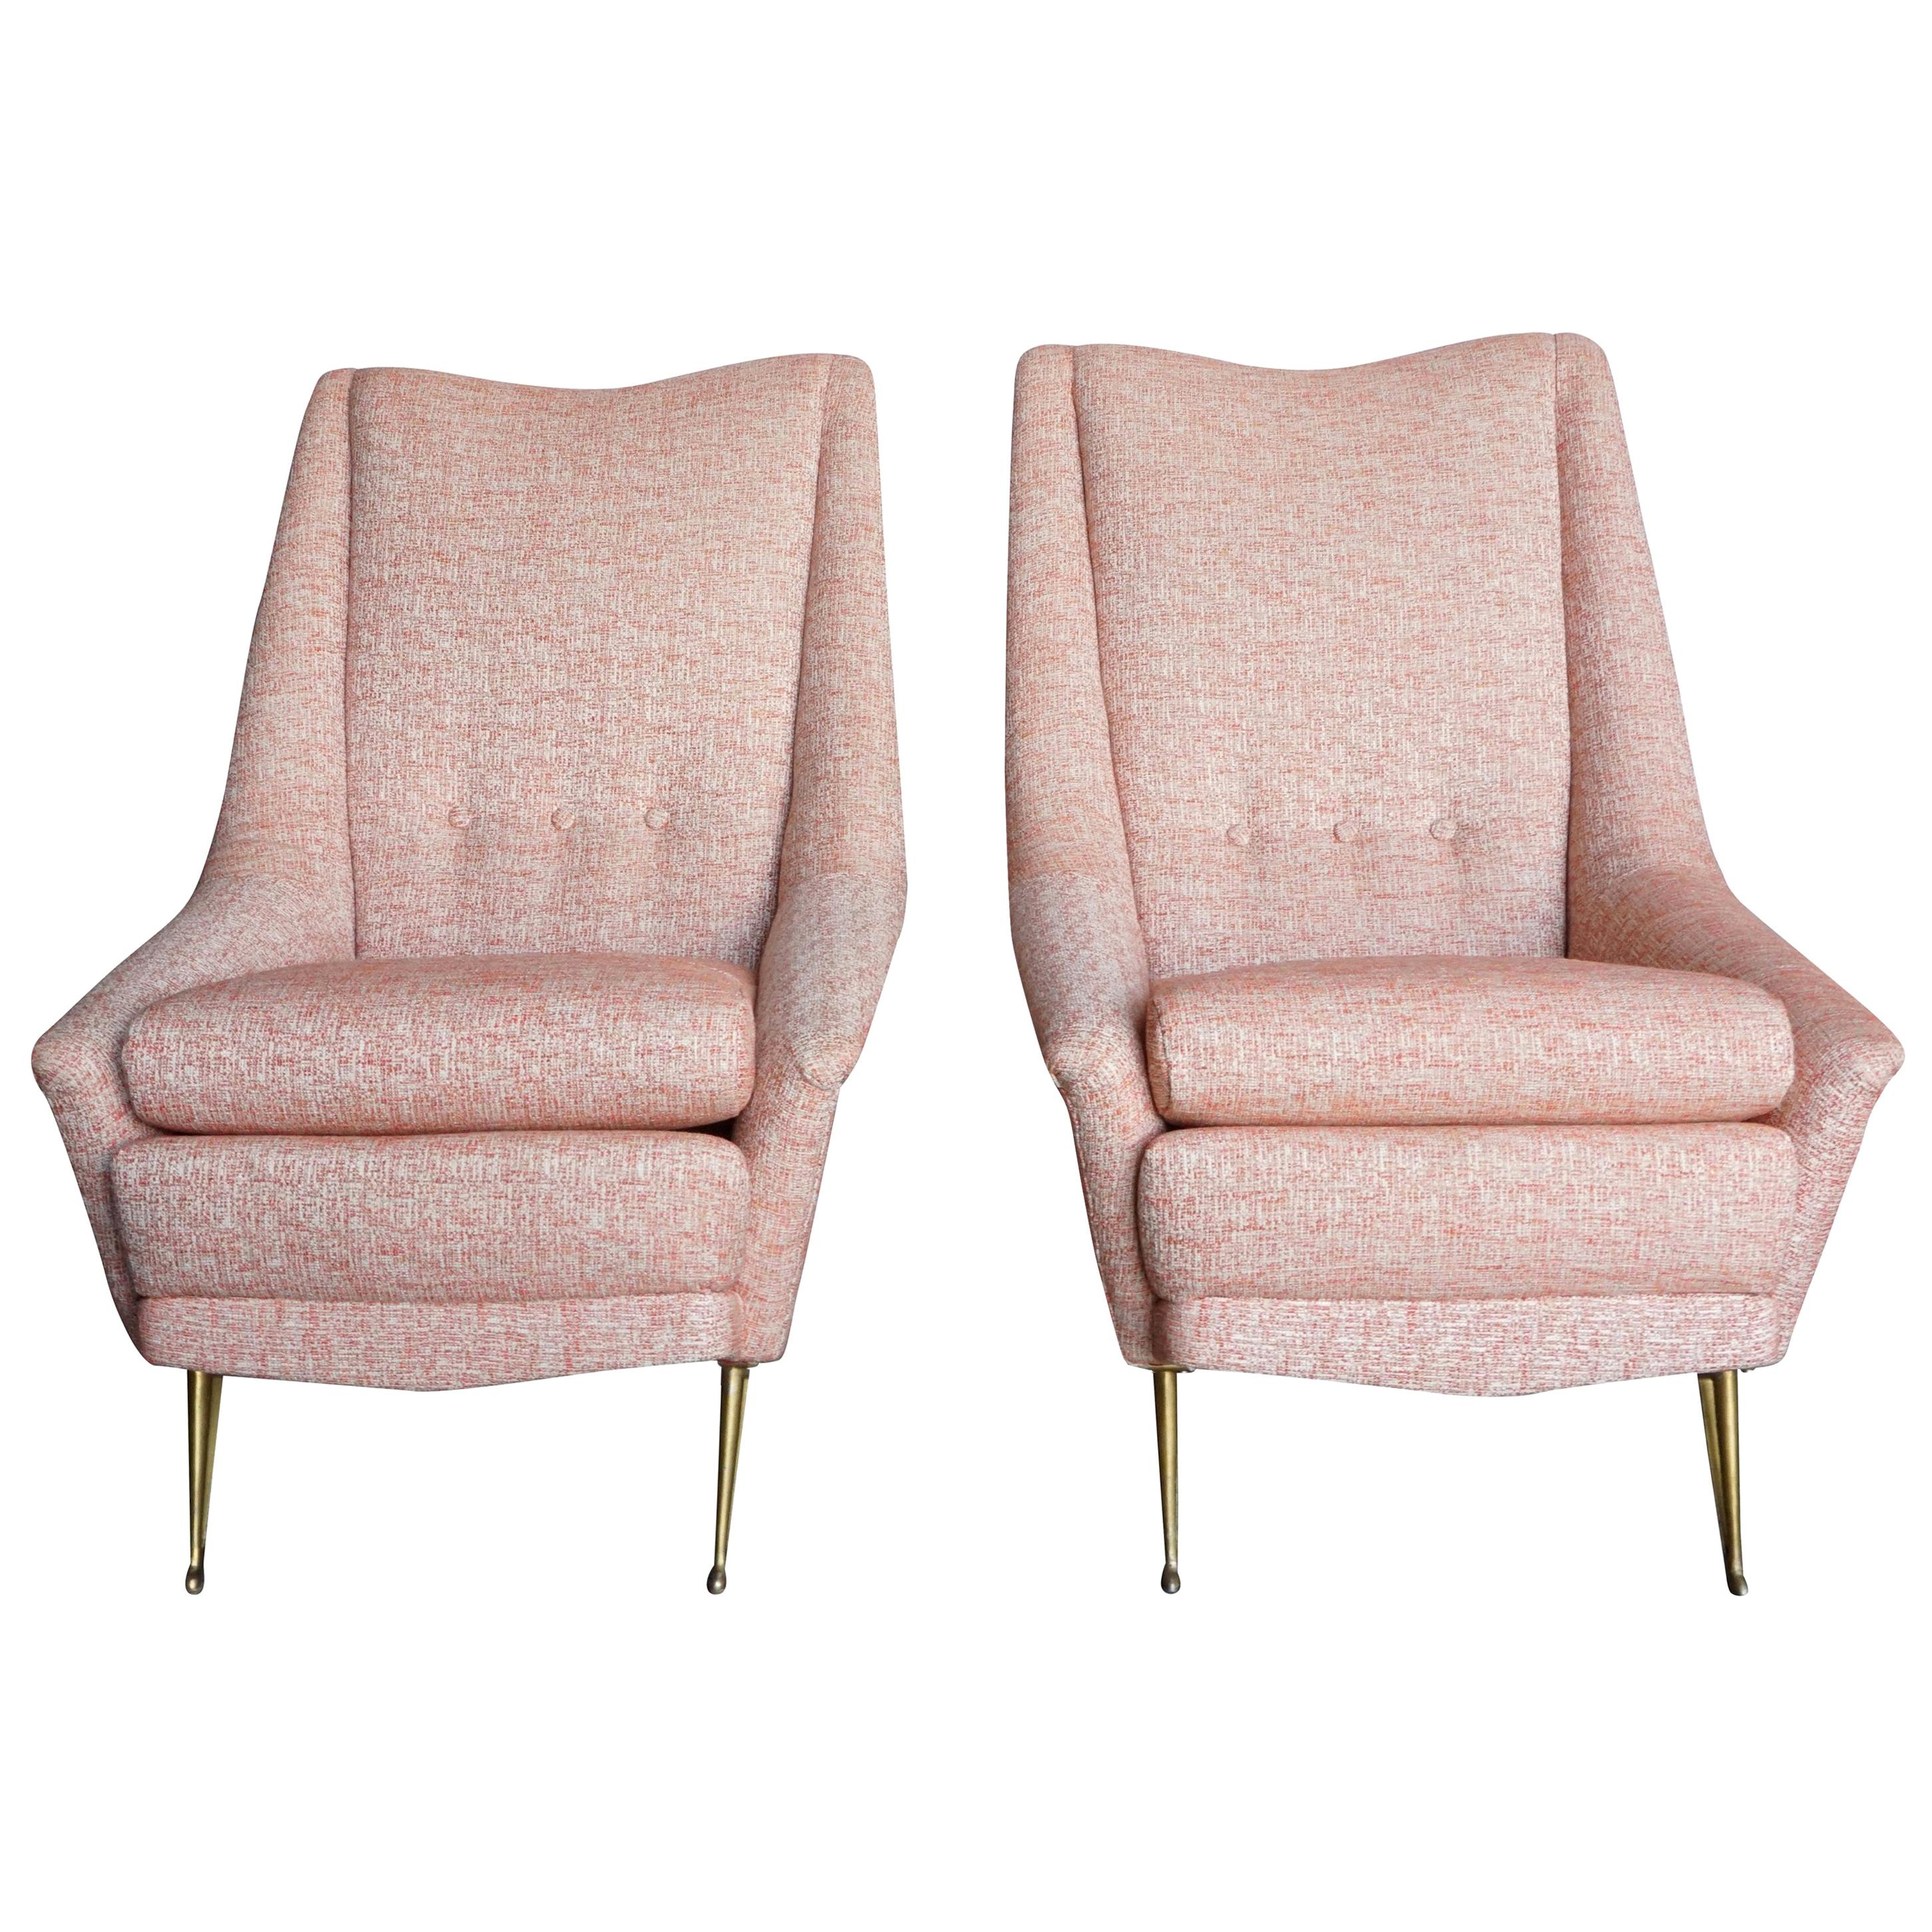 20th Century Italian Pair of Pink Style Lounge Chairs Marco Zanusso